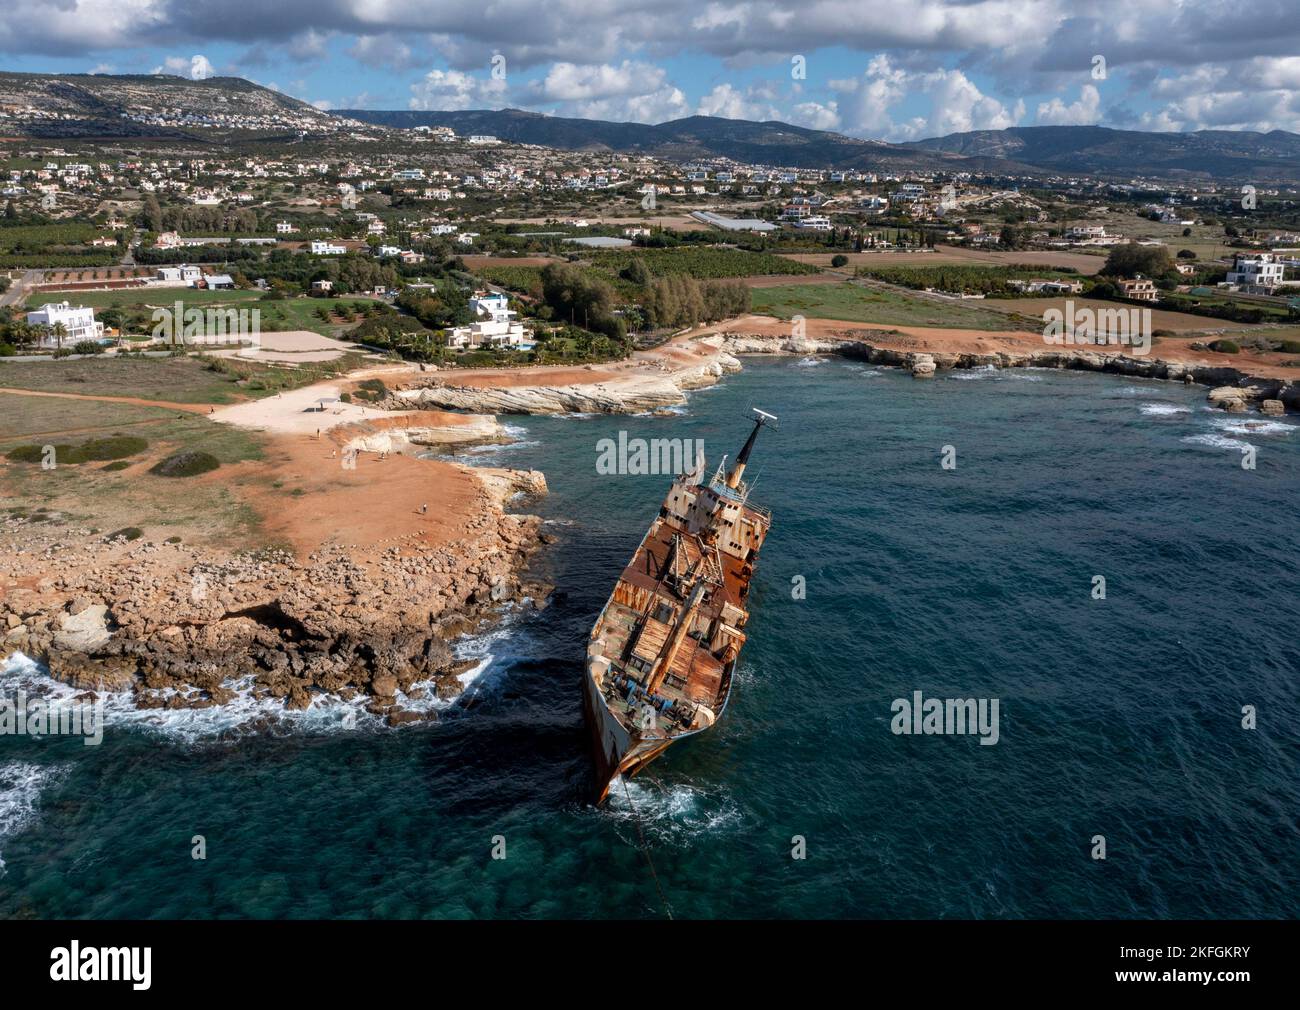 Aerial view of the Edro 111 shipwreck on the rocks near Peyia, Paphos, Cyprus. The ship run aground during a storm in December 2011. Stock Photo